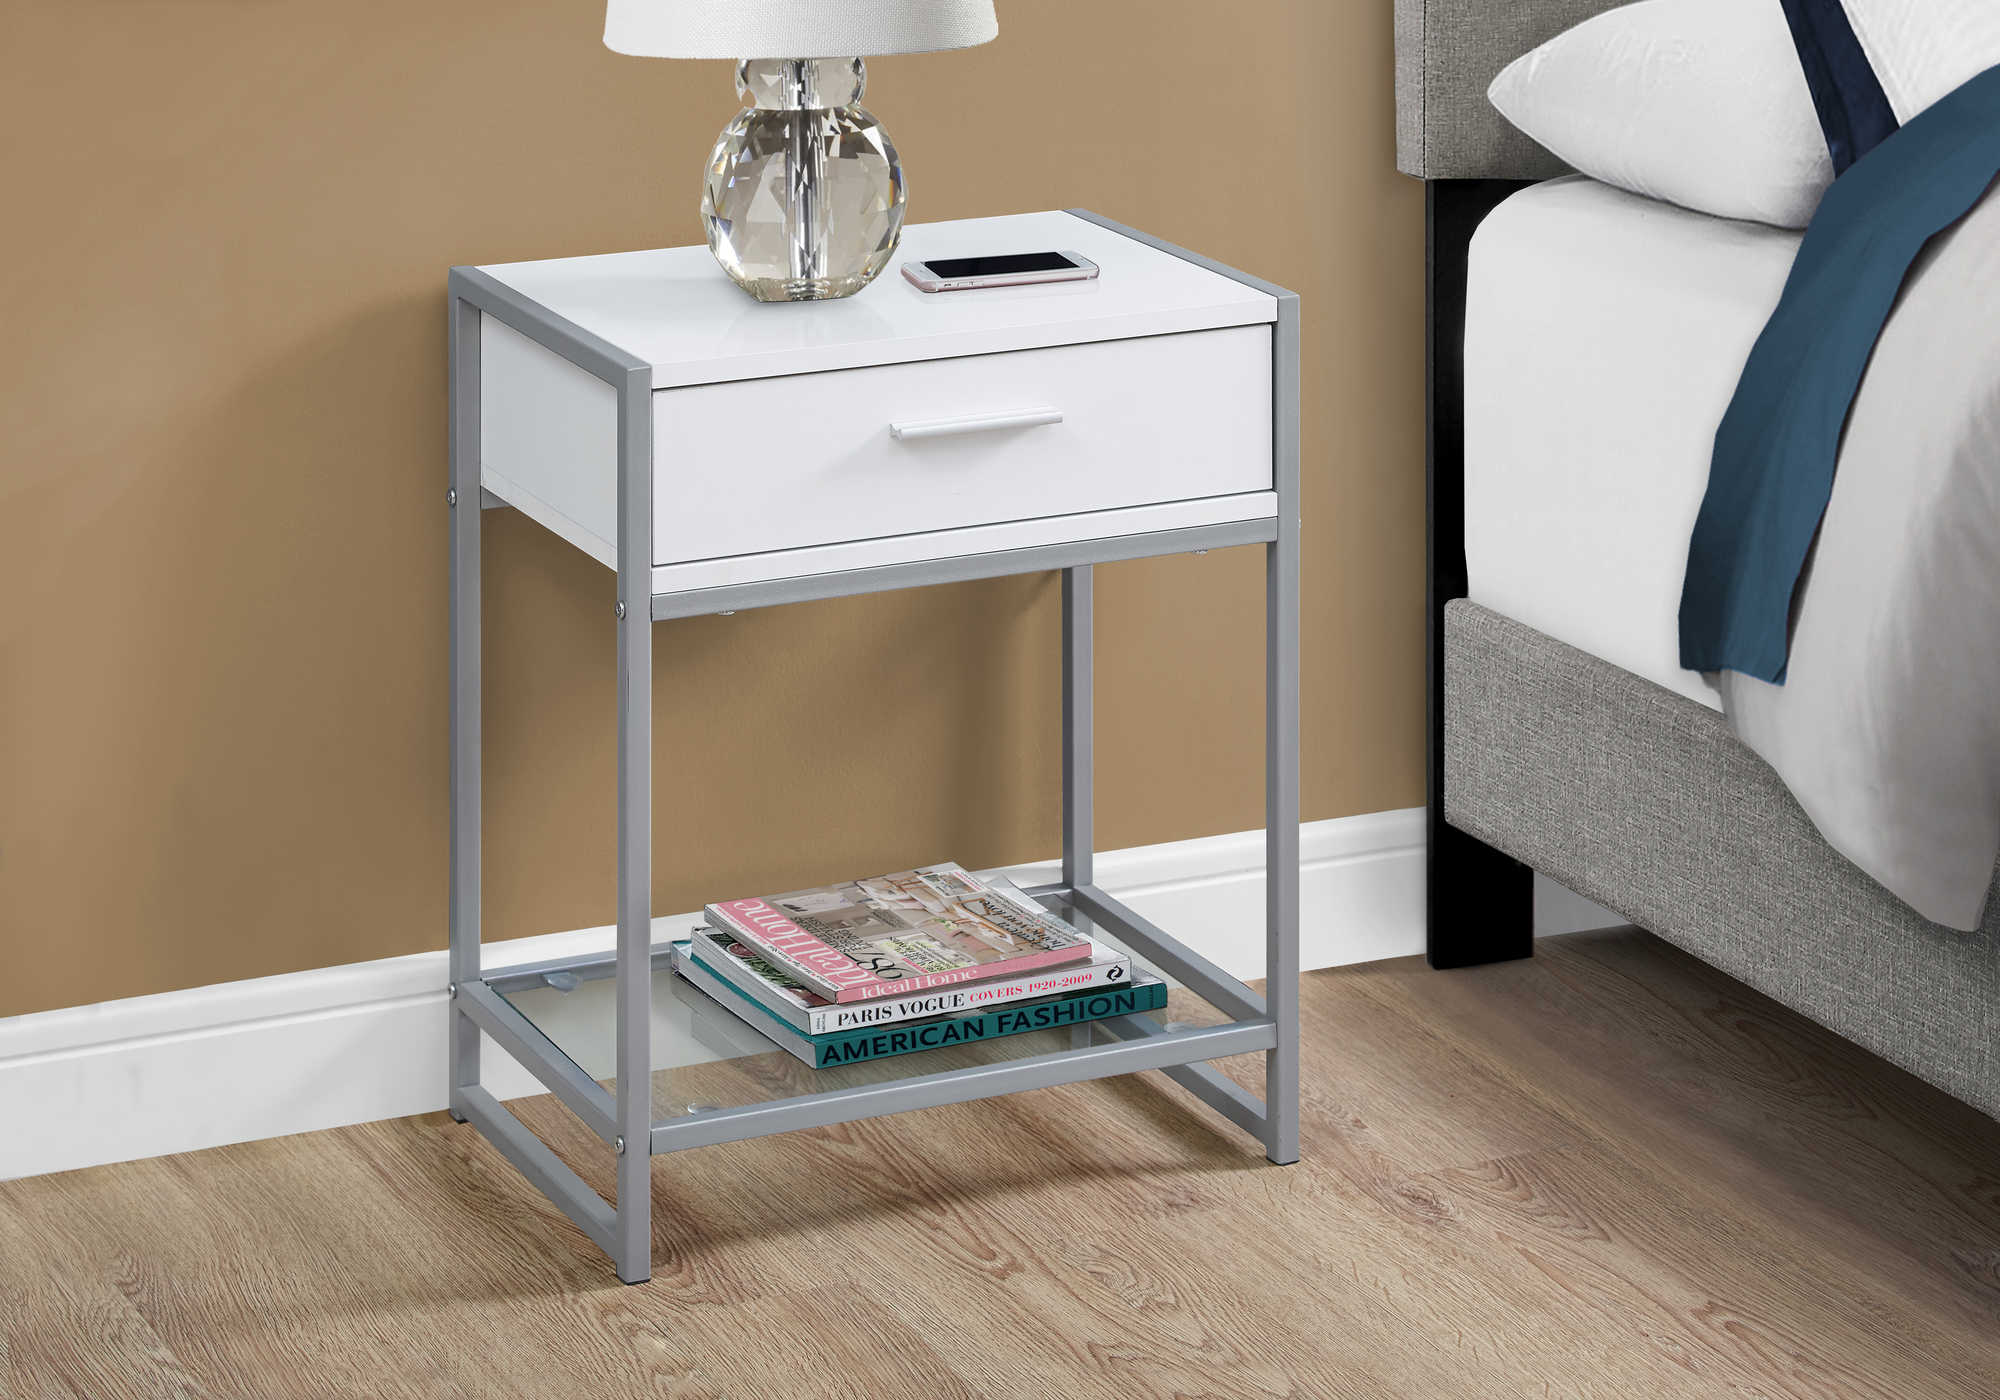 BEDROOM NIGHTSTAND - 22"H / WHITE/ SILVER METAL/ TEMPERED GLASS